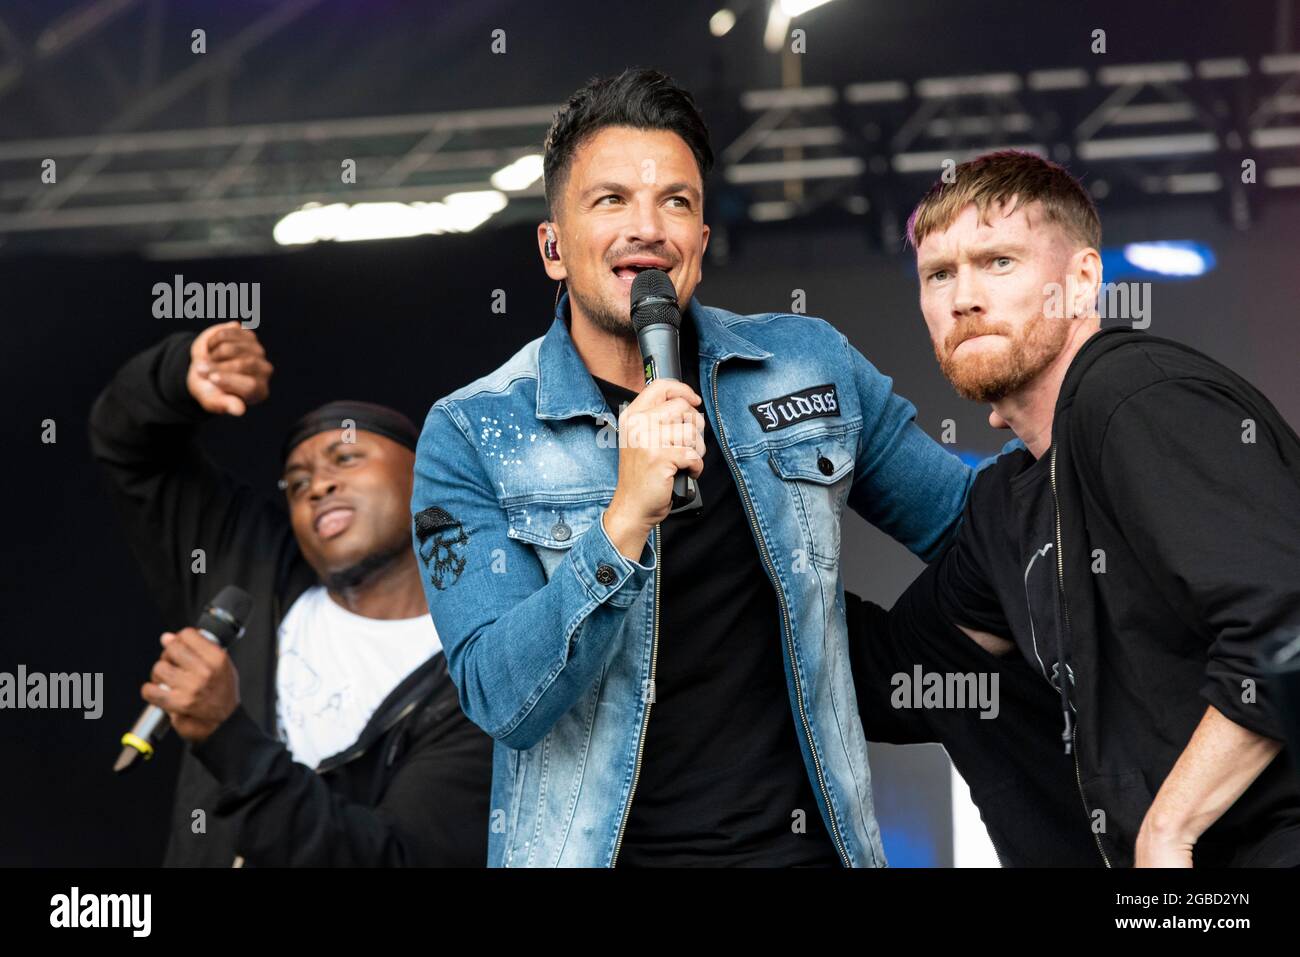 Peter Andre performing with backing singers on stage at the Fantasia music concert in Maldon, Essex, UK soon after lifting of COVID restrictions Stock Photo